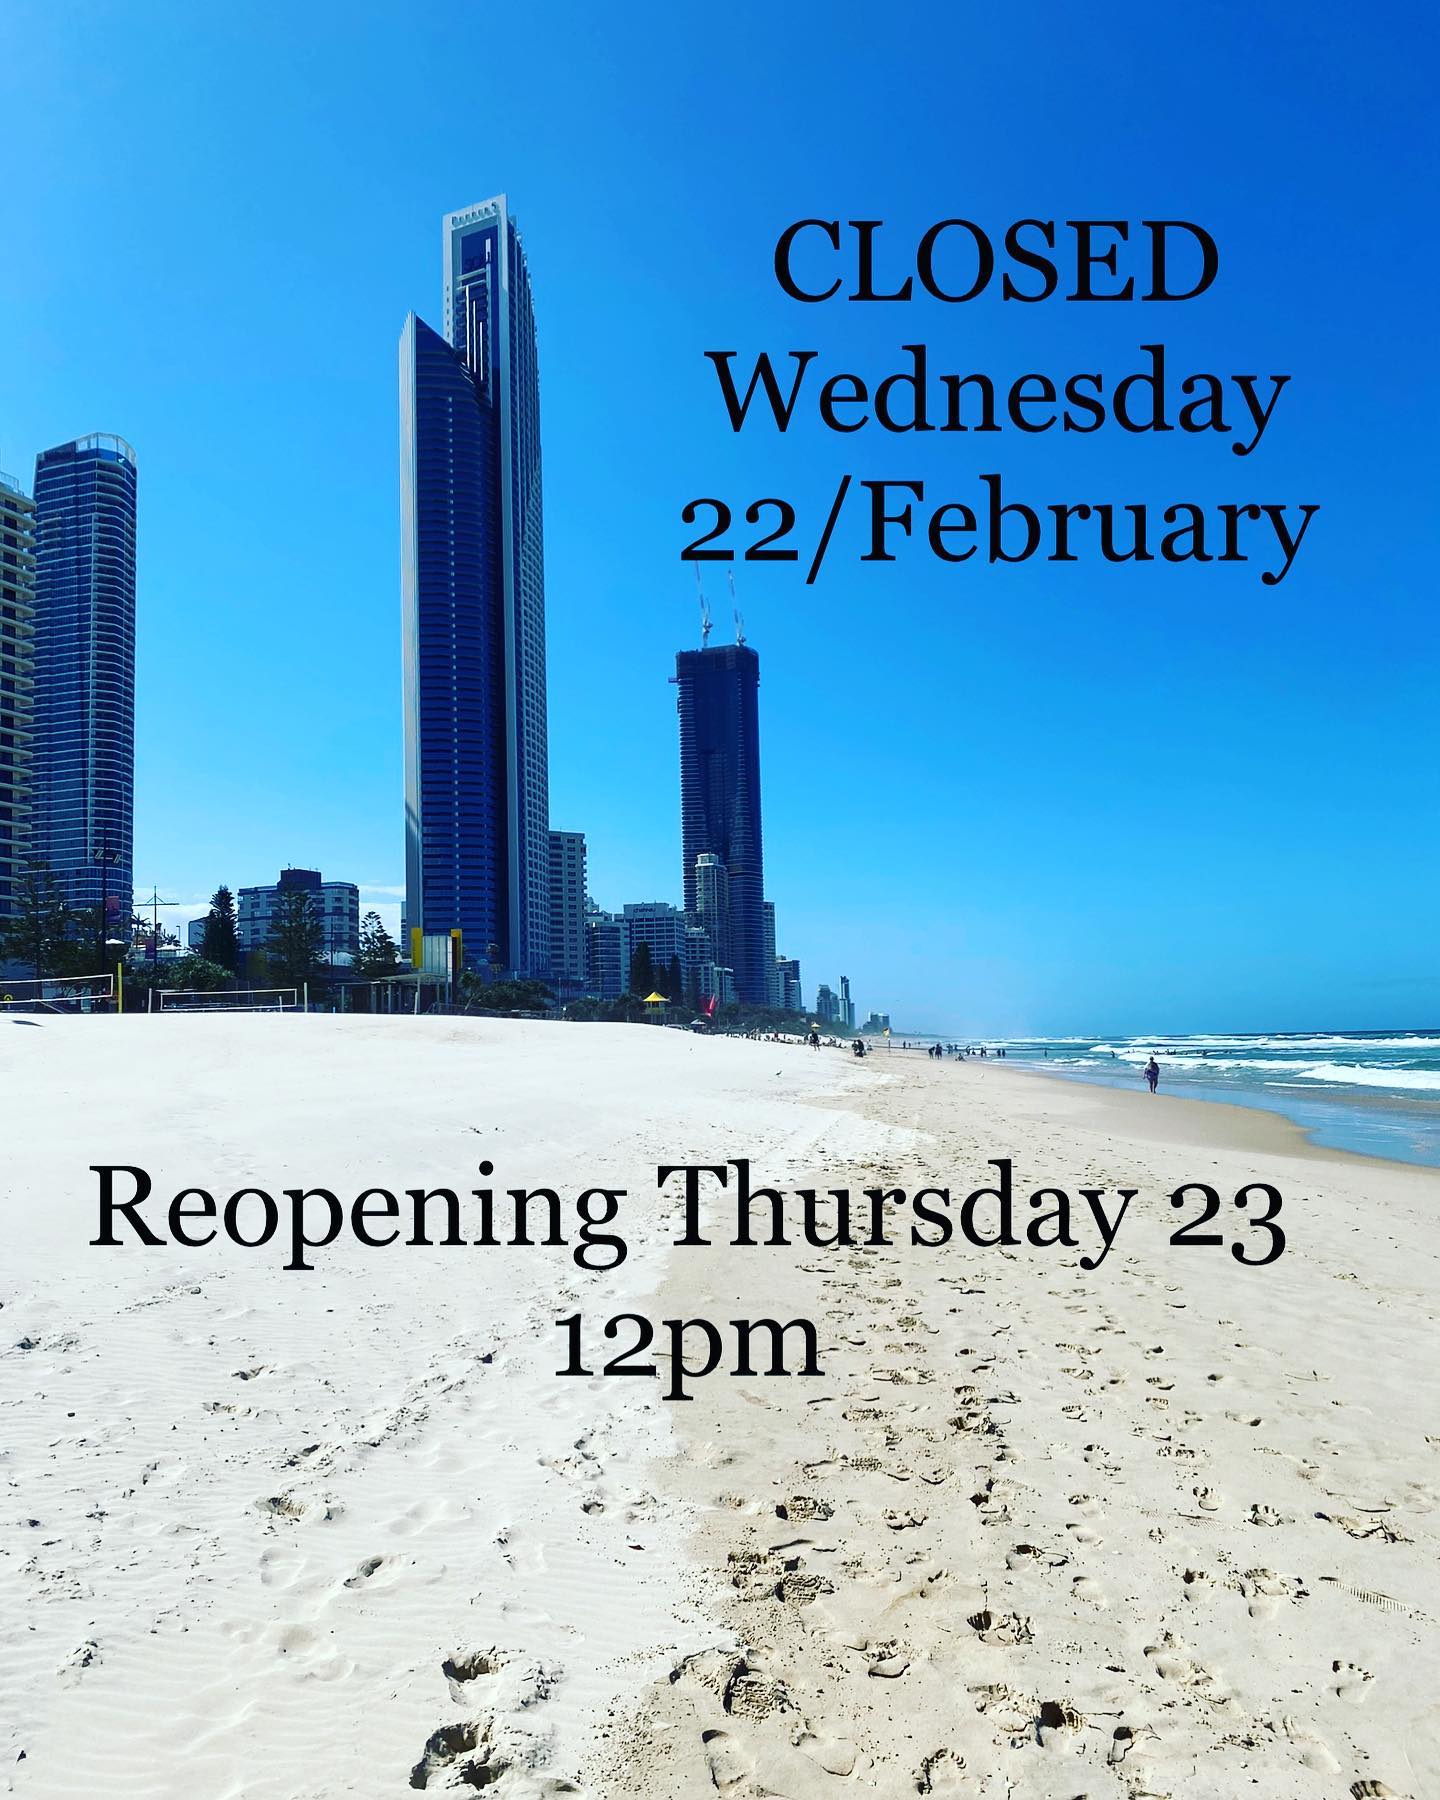 We will be closed on Wednesday 22/February.
Sorry for any inconvenience.